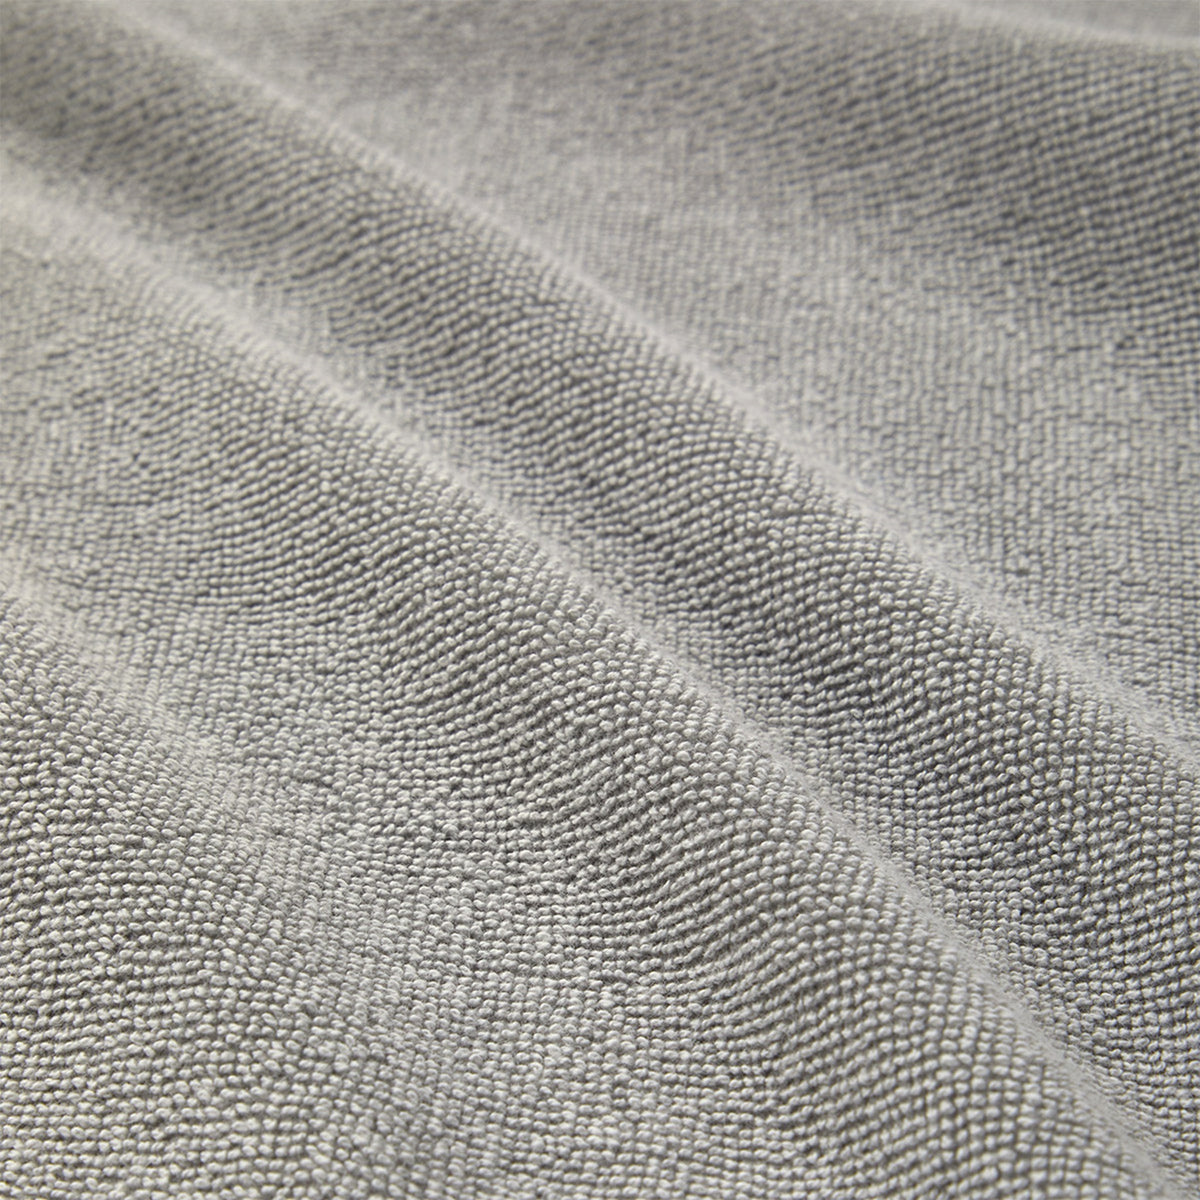 Detail of Yves Delorme Croisiere Beach Towels Platine